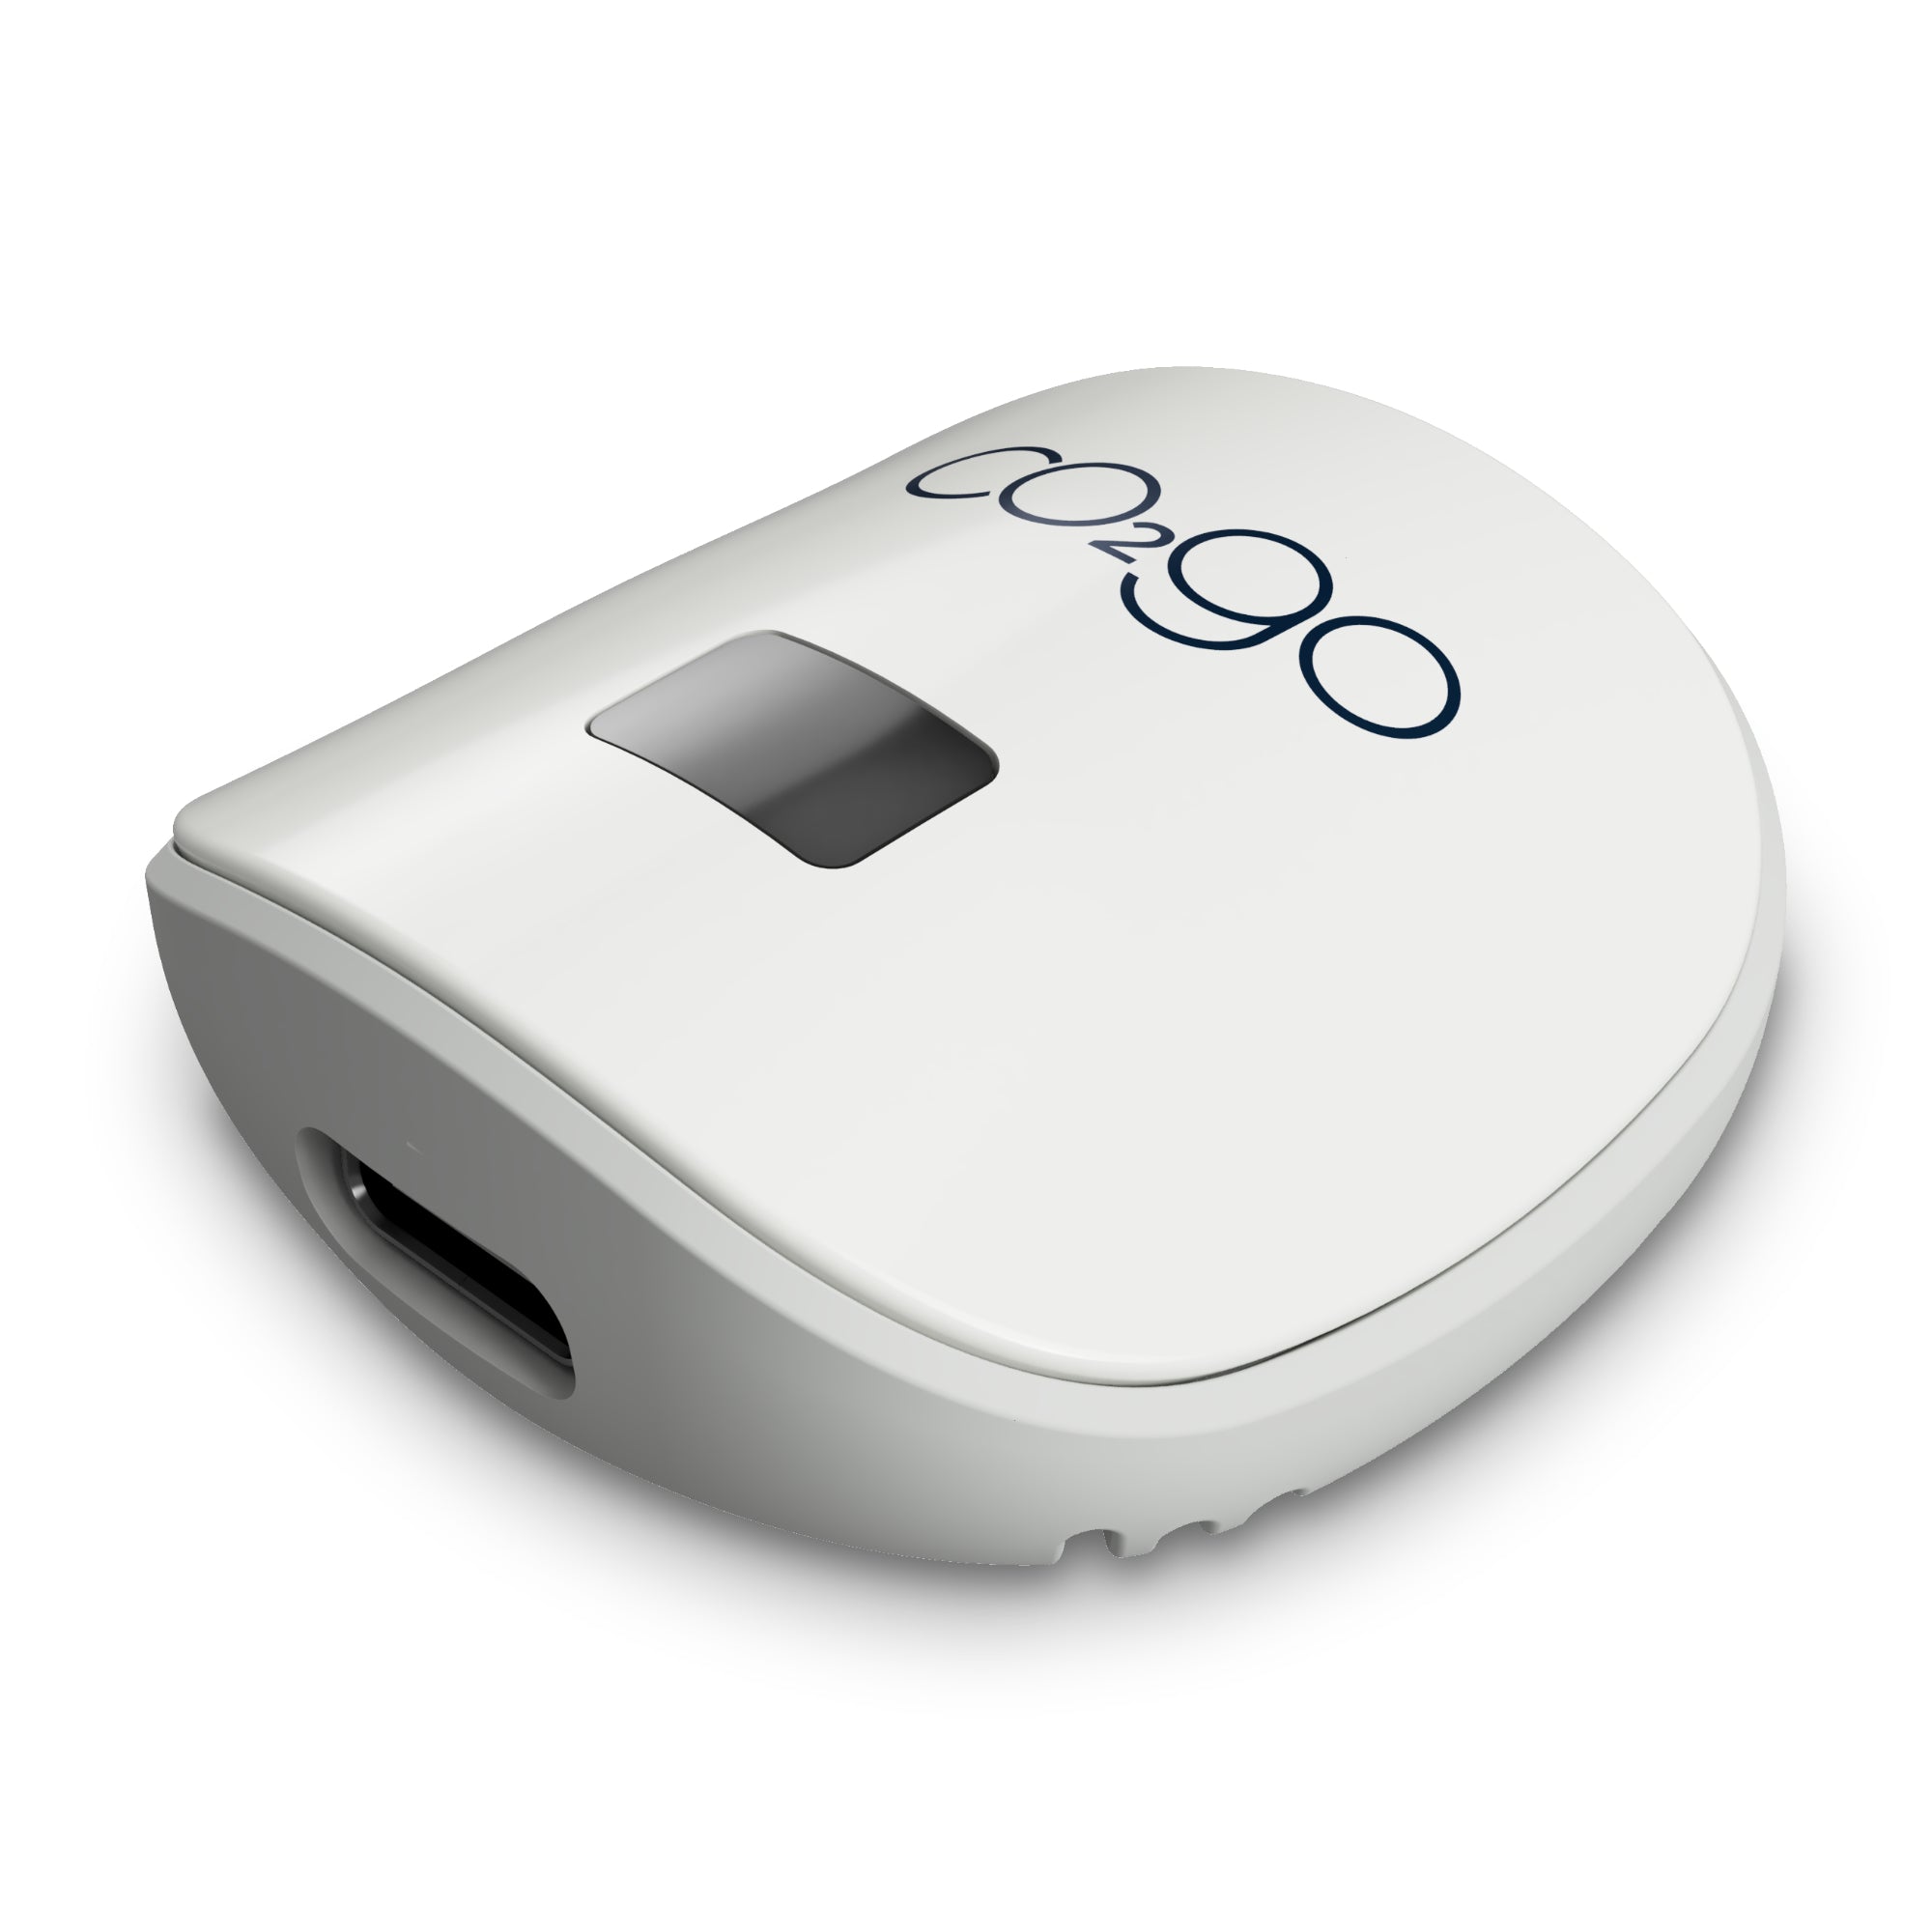 co₂go - your small companion, engineered and designed in Germany